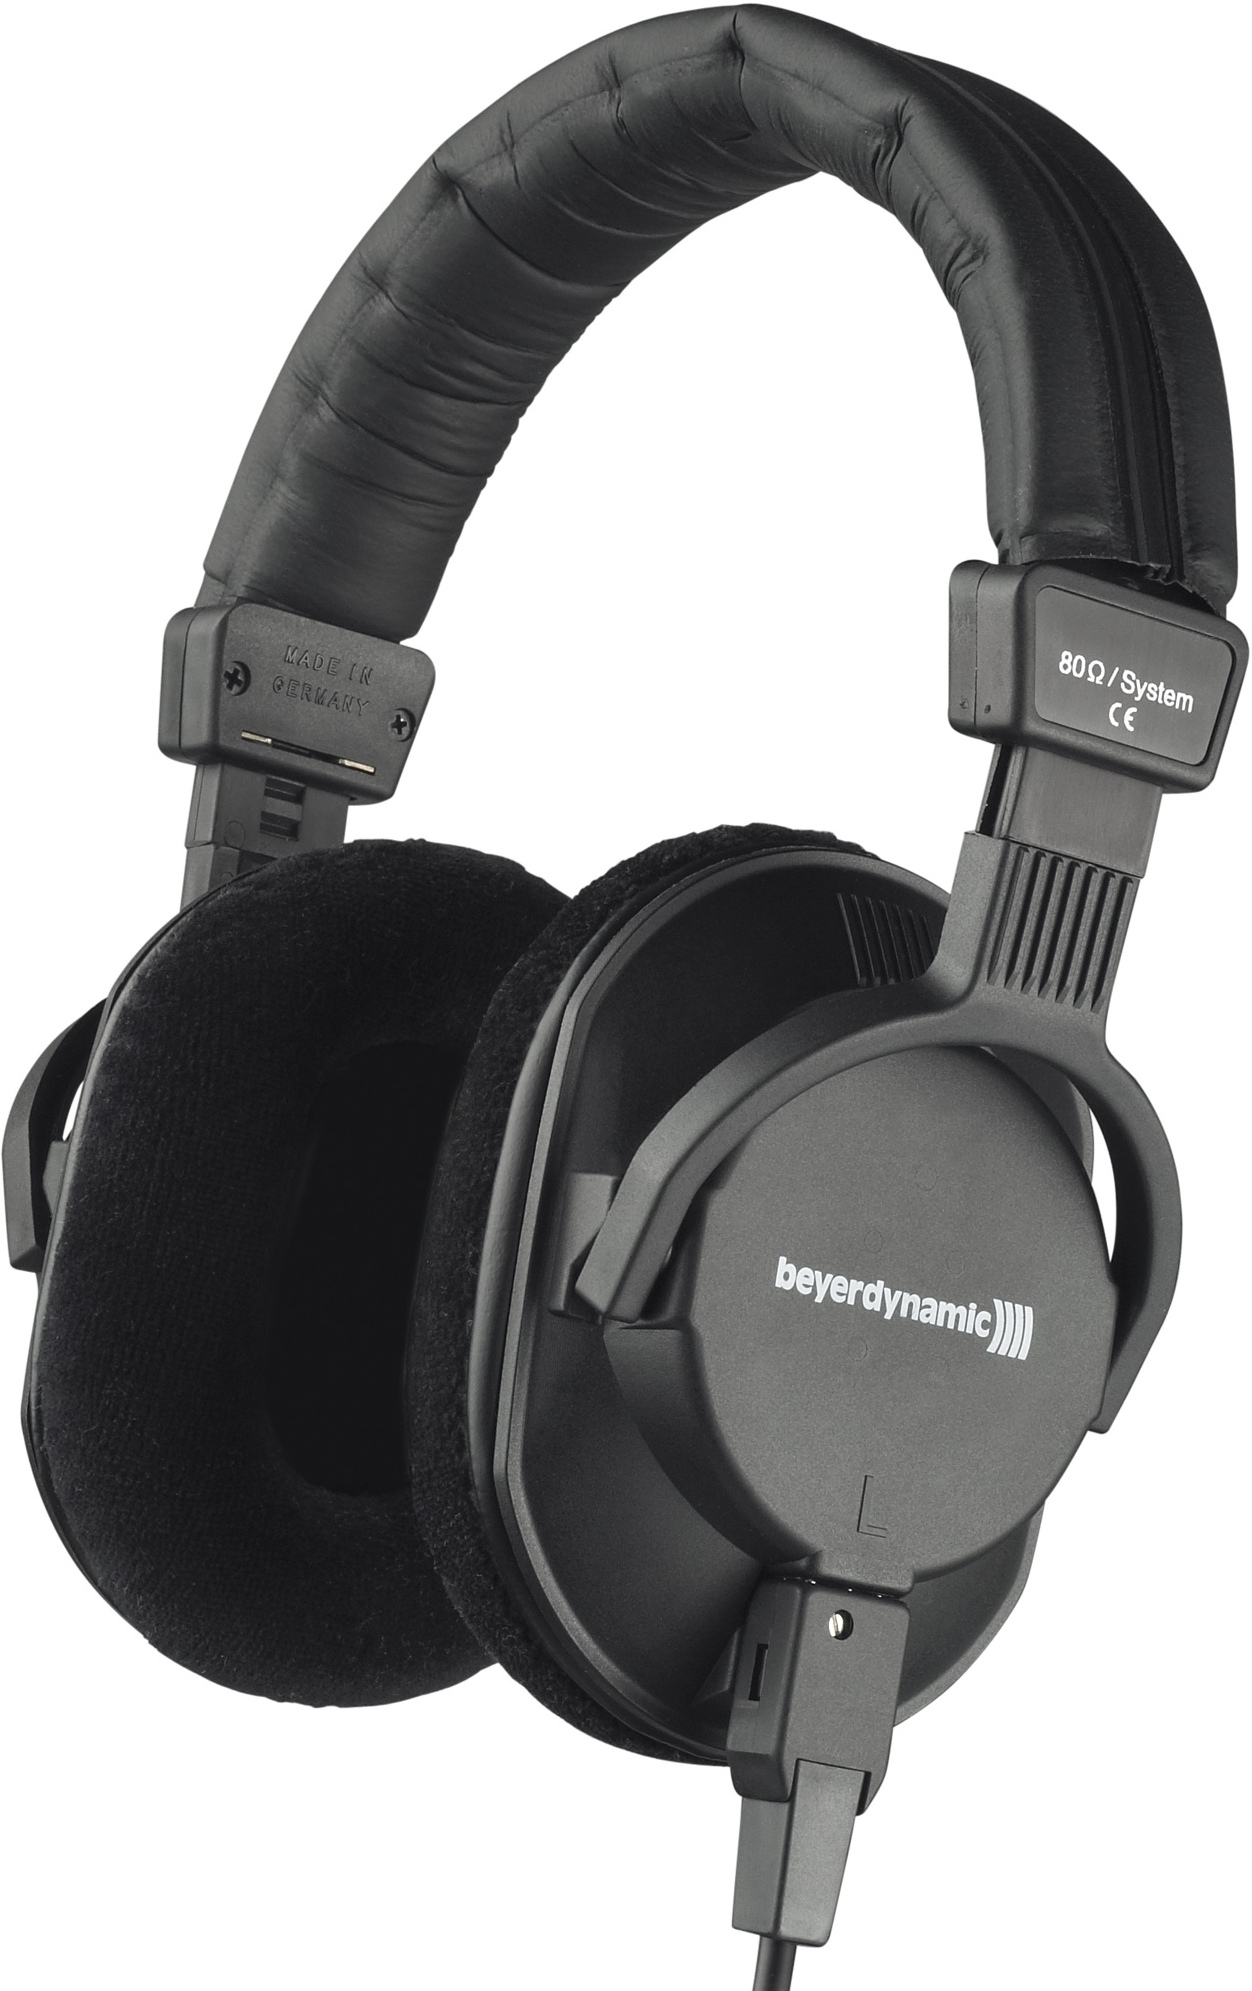 Beyerdynamic Dt 250 250 Ohms - Closed headset - Main picture